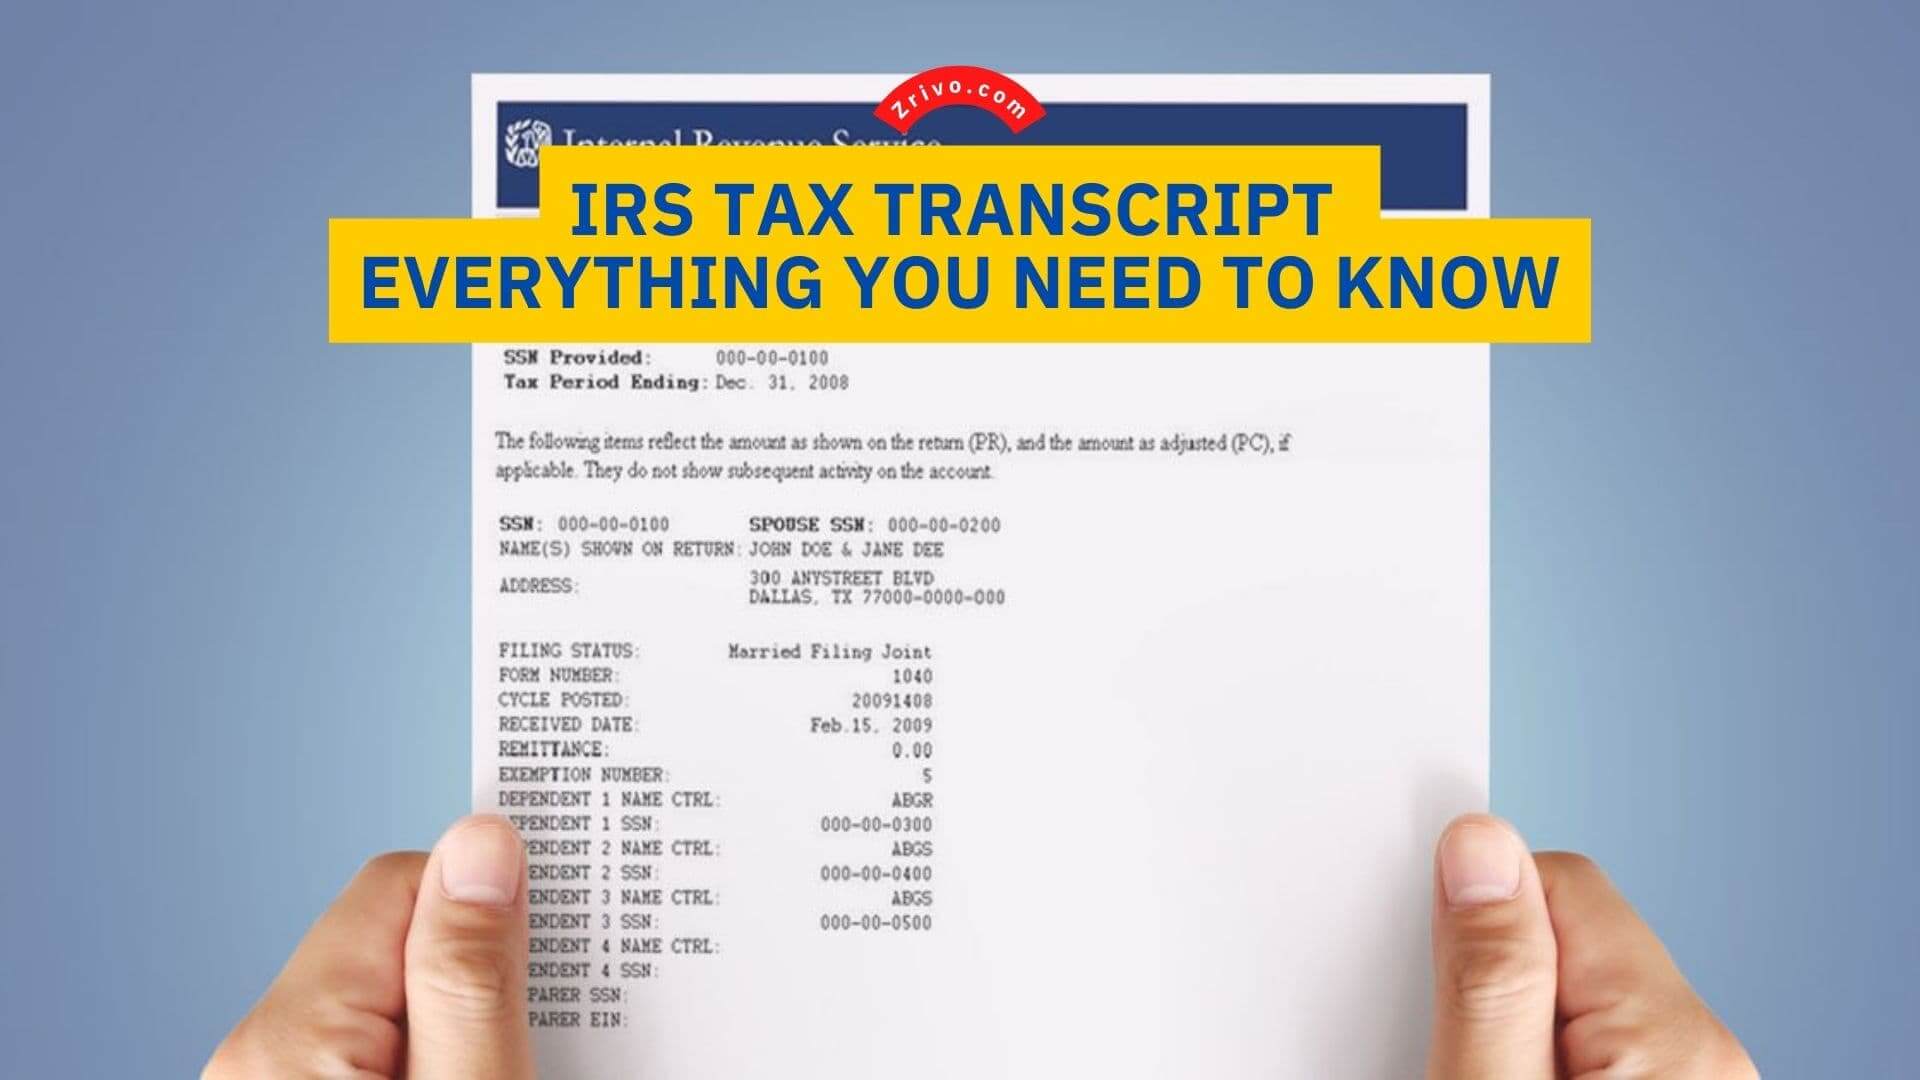 IRS Tax Transcript - Everything You Need To Know